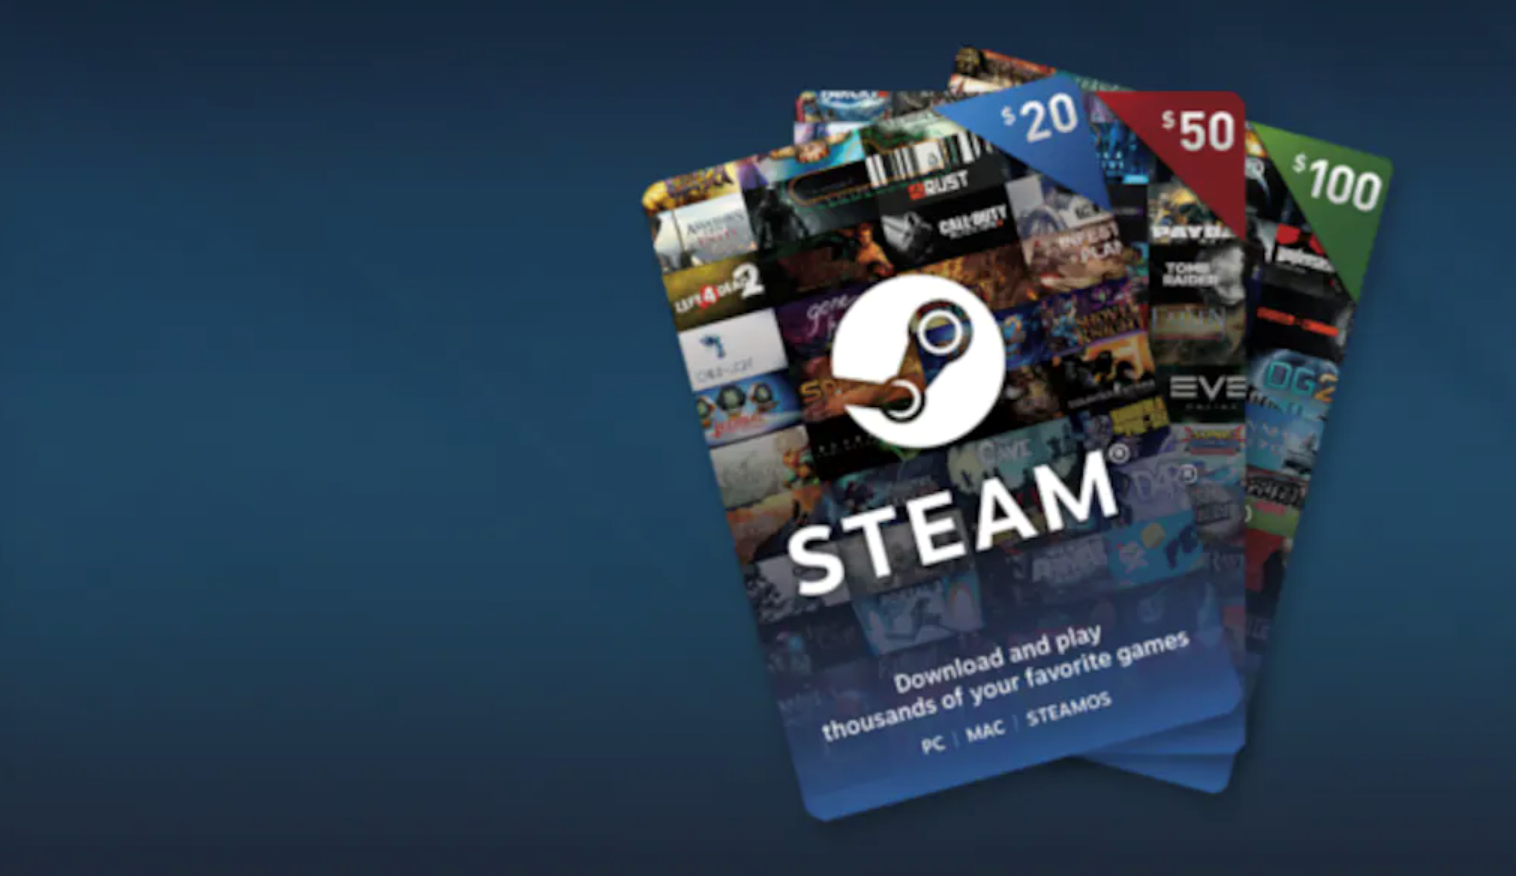 Buy from steam us фото 85